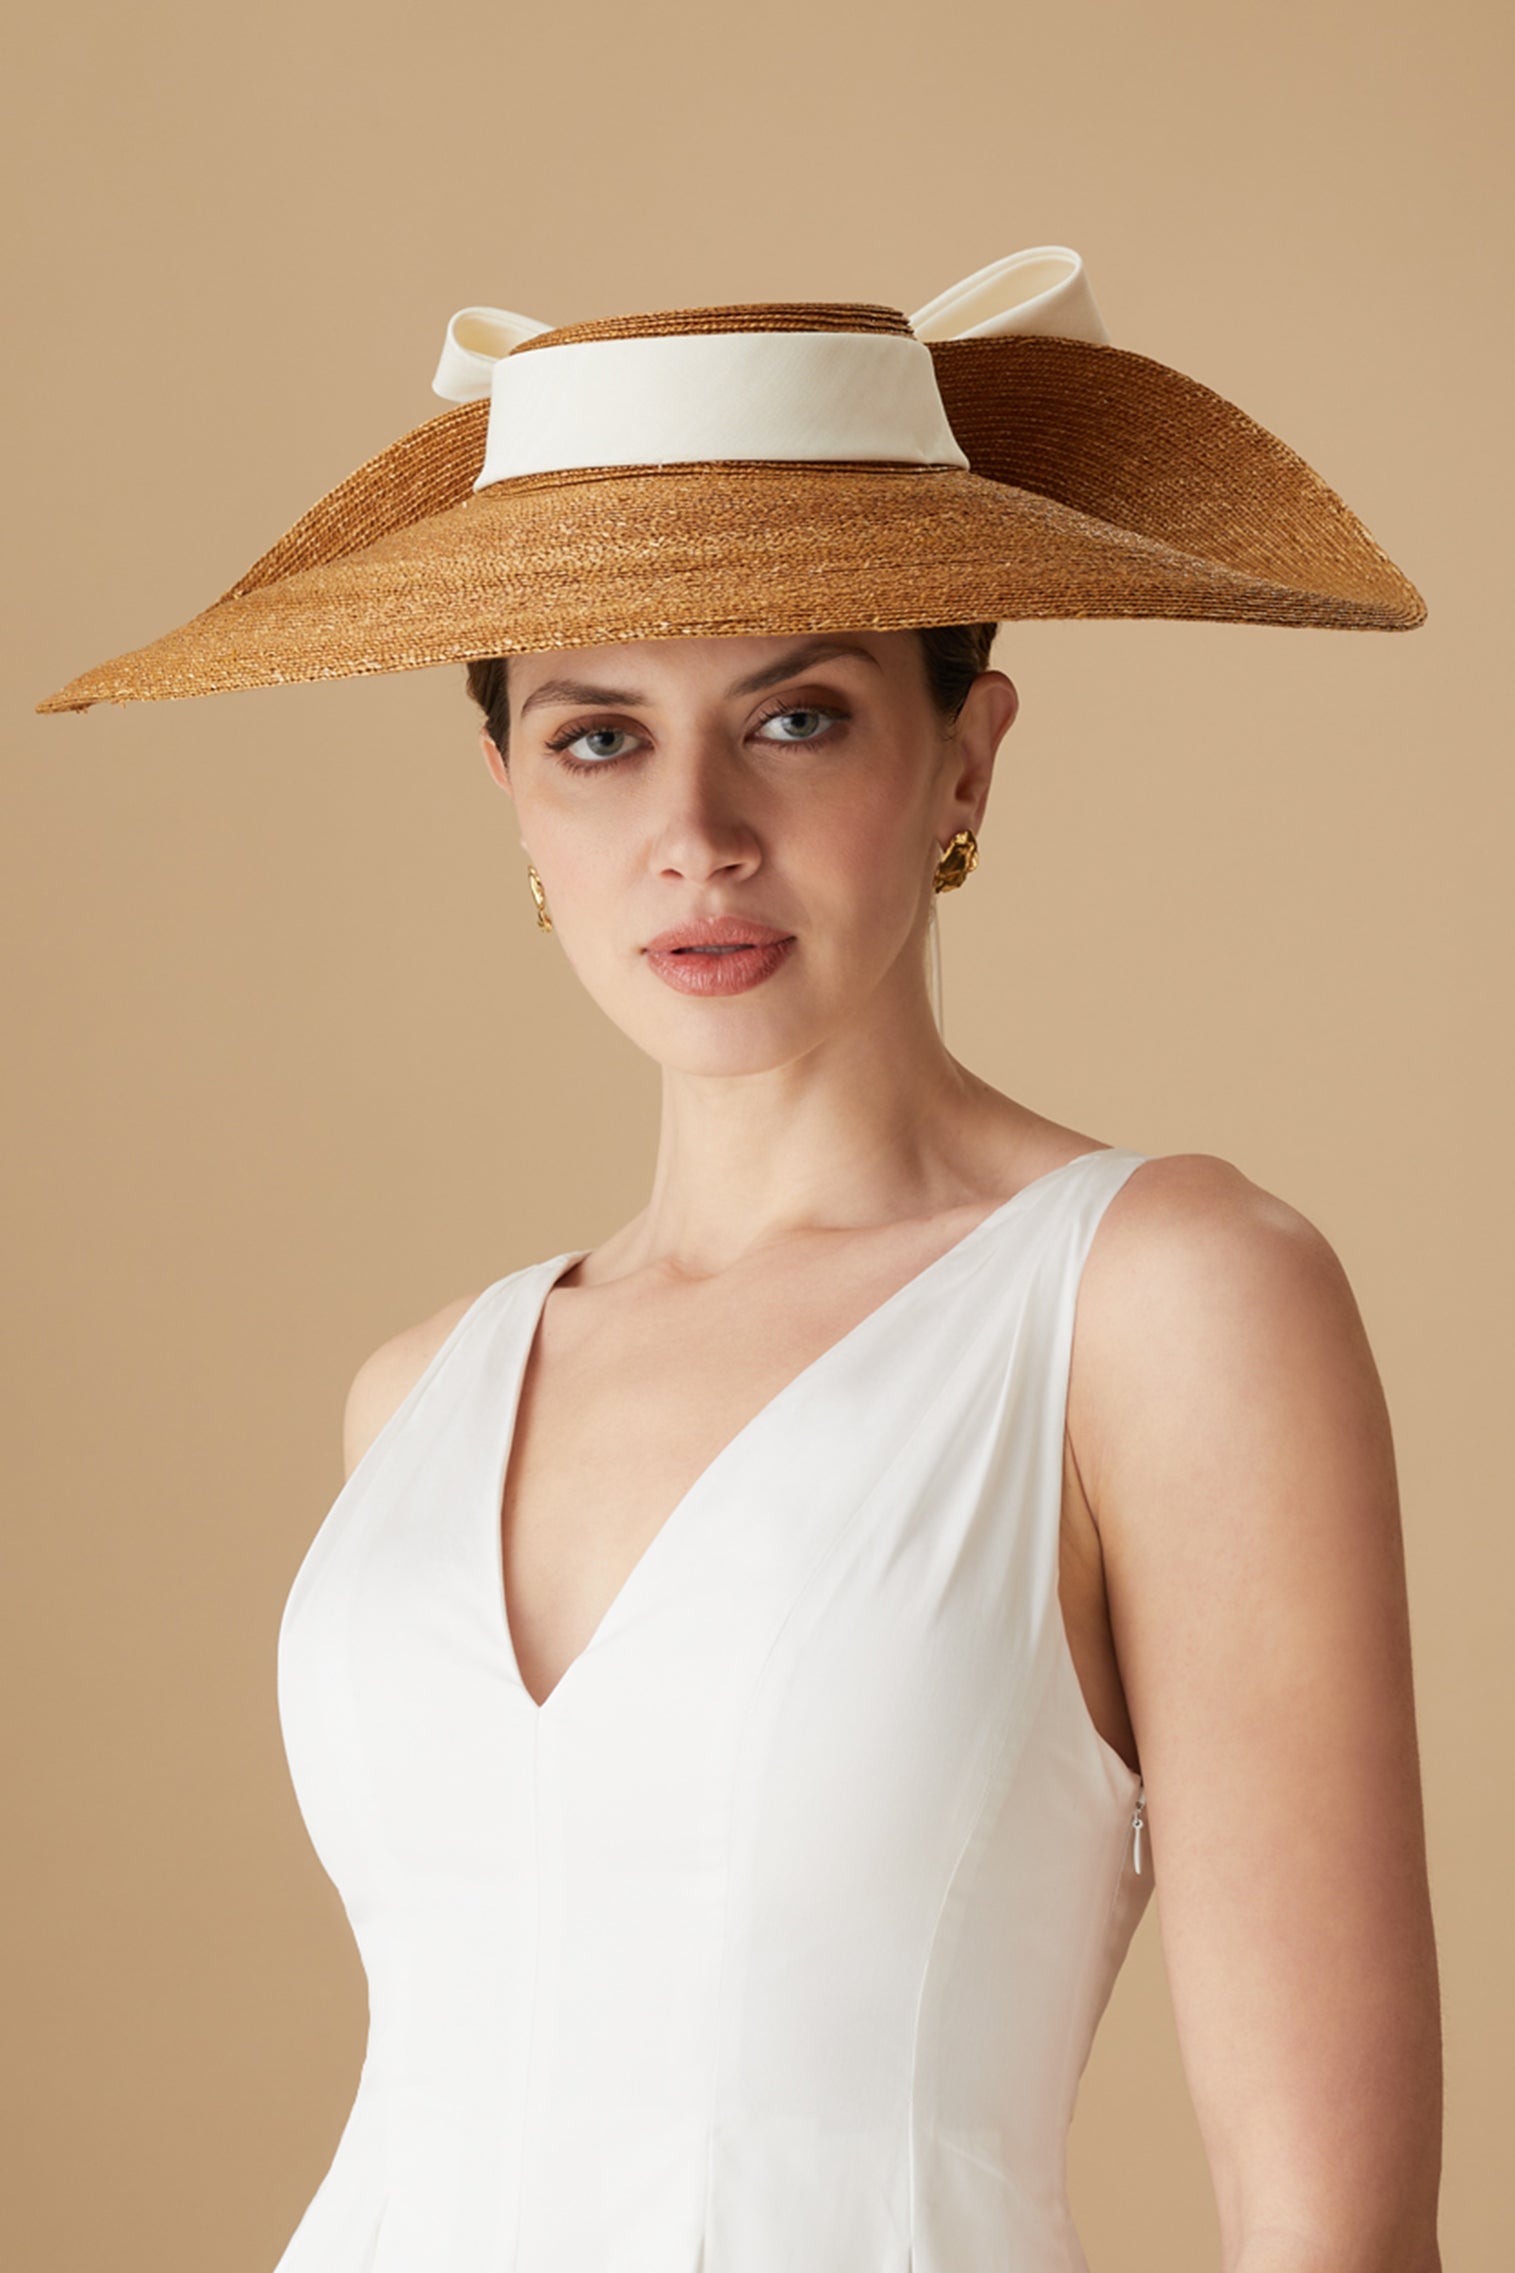 Lady Grey Natural Wide Brim Hat - Panamas, Straw and Sun Hats for Women - Lock & Co. Hatters London UK